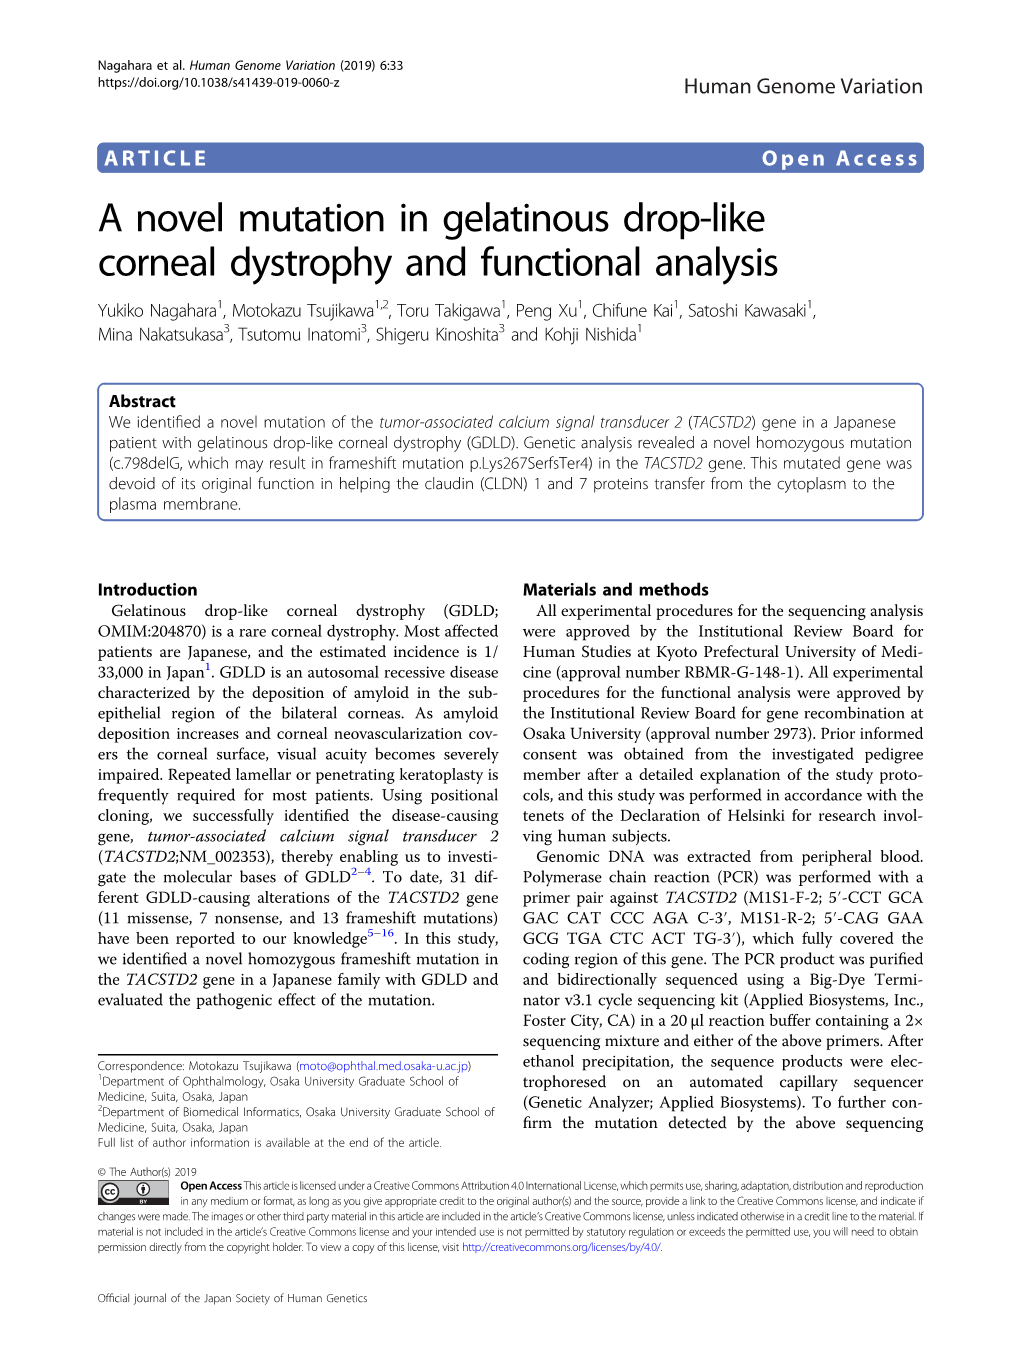 A Novel Mutation in Gelatinous Drop-Like Corneal Dystrophy And